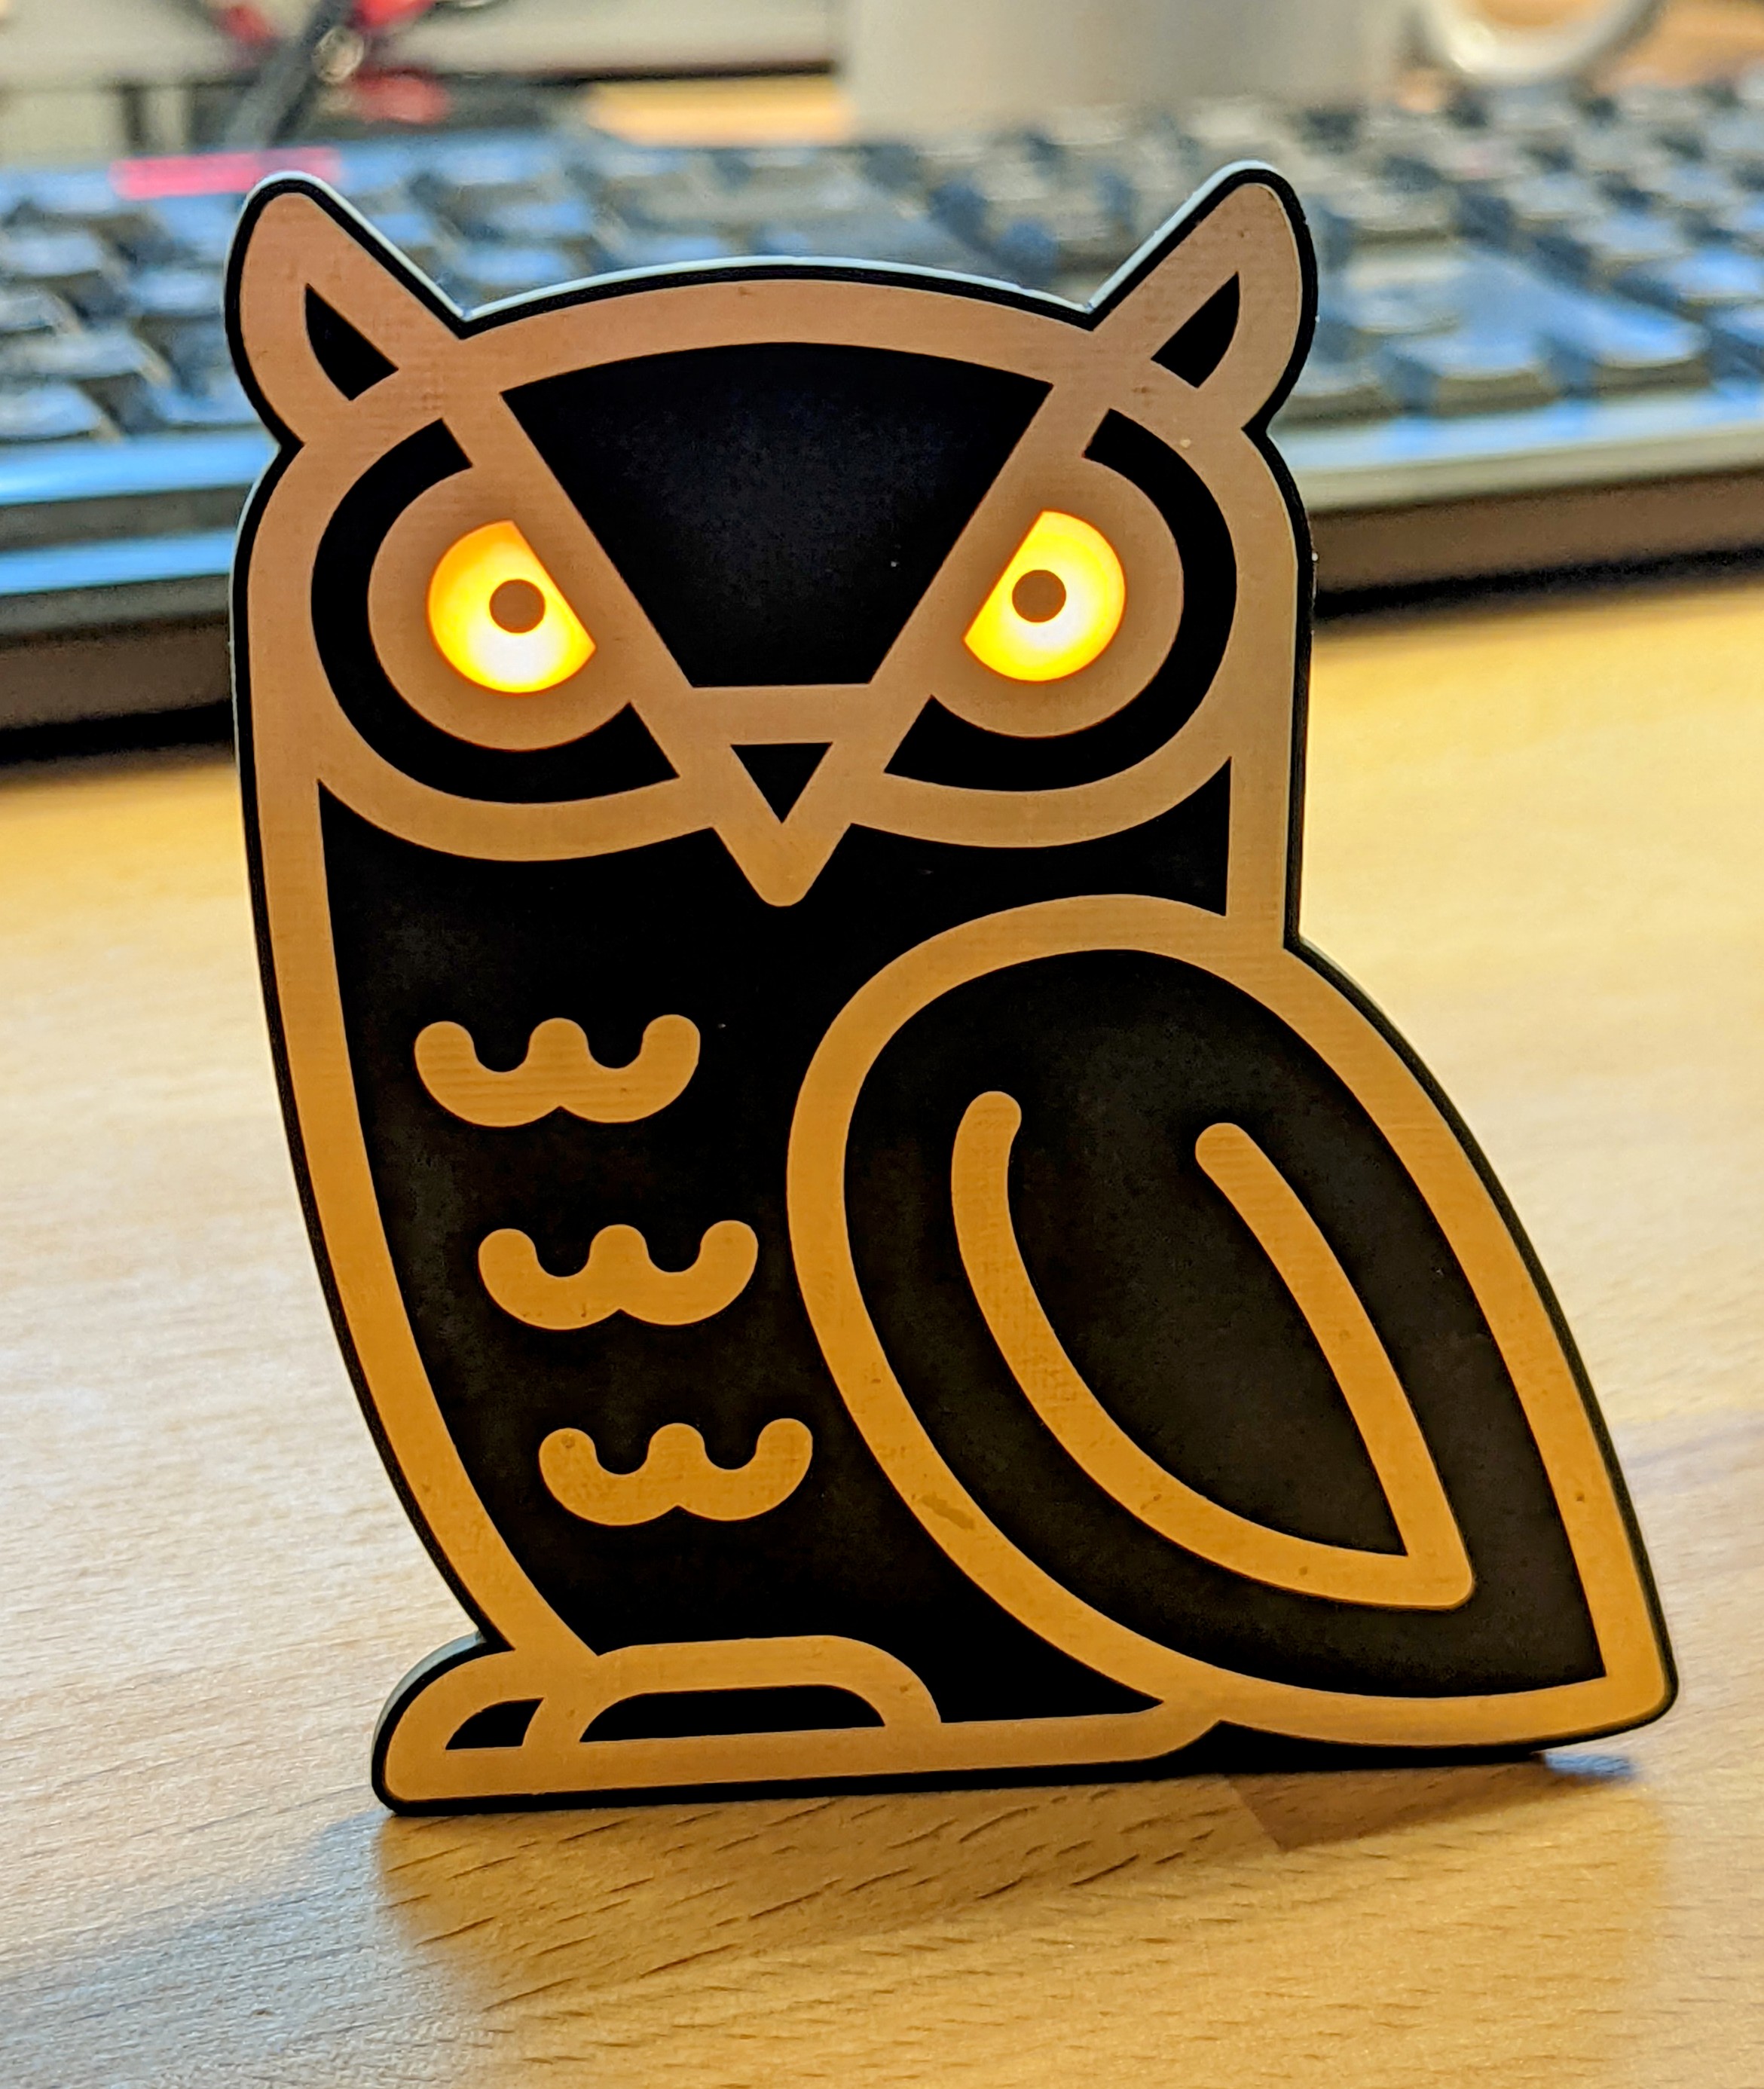 The OwlThief - A Golden Owl with Glowing Orange Eyes (Joul Thief circuit in THT version)